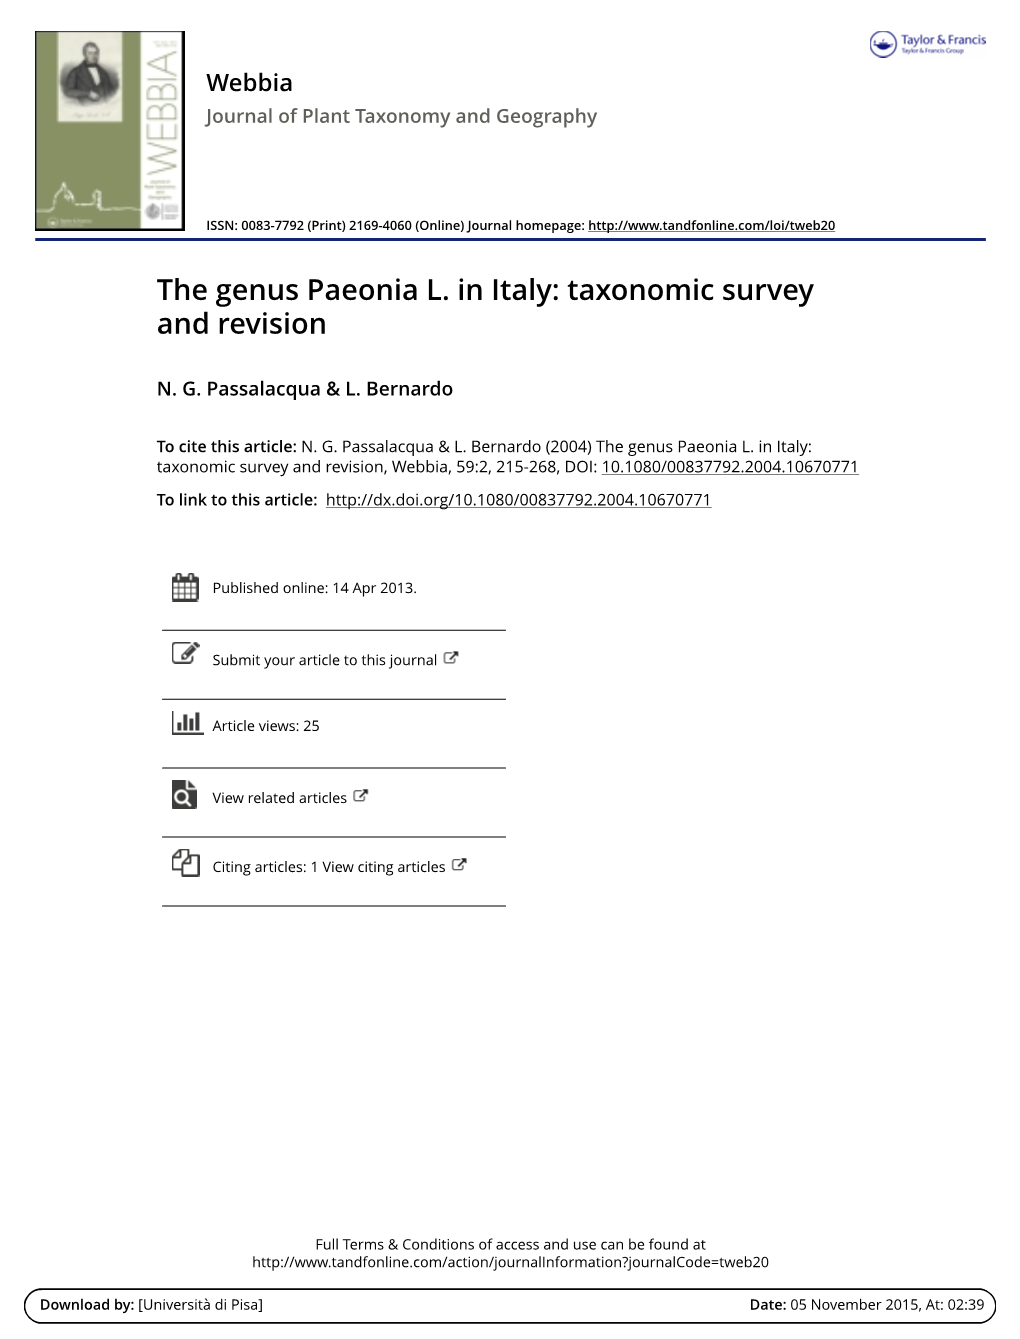 The Genus Paeonia L. in Italy: Taxonomic Survey and Revision